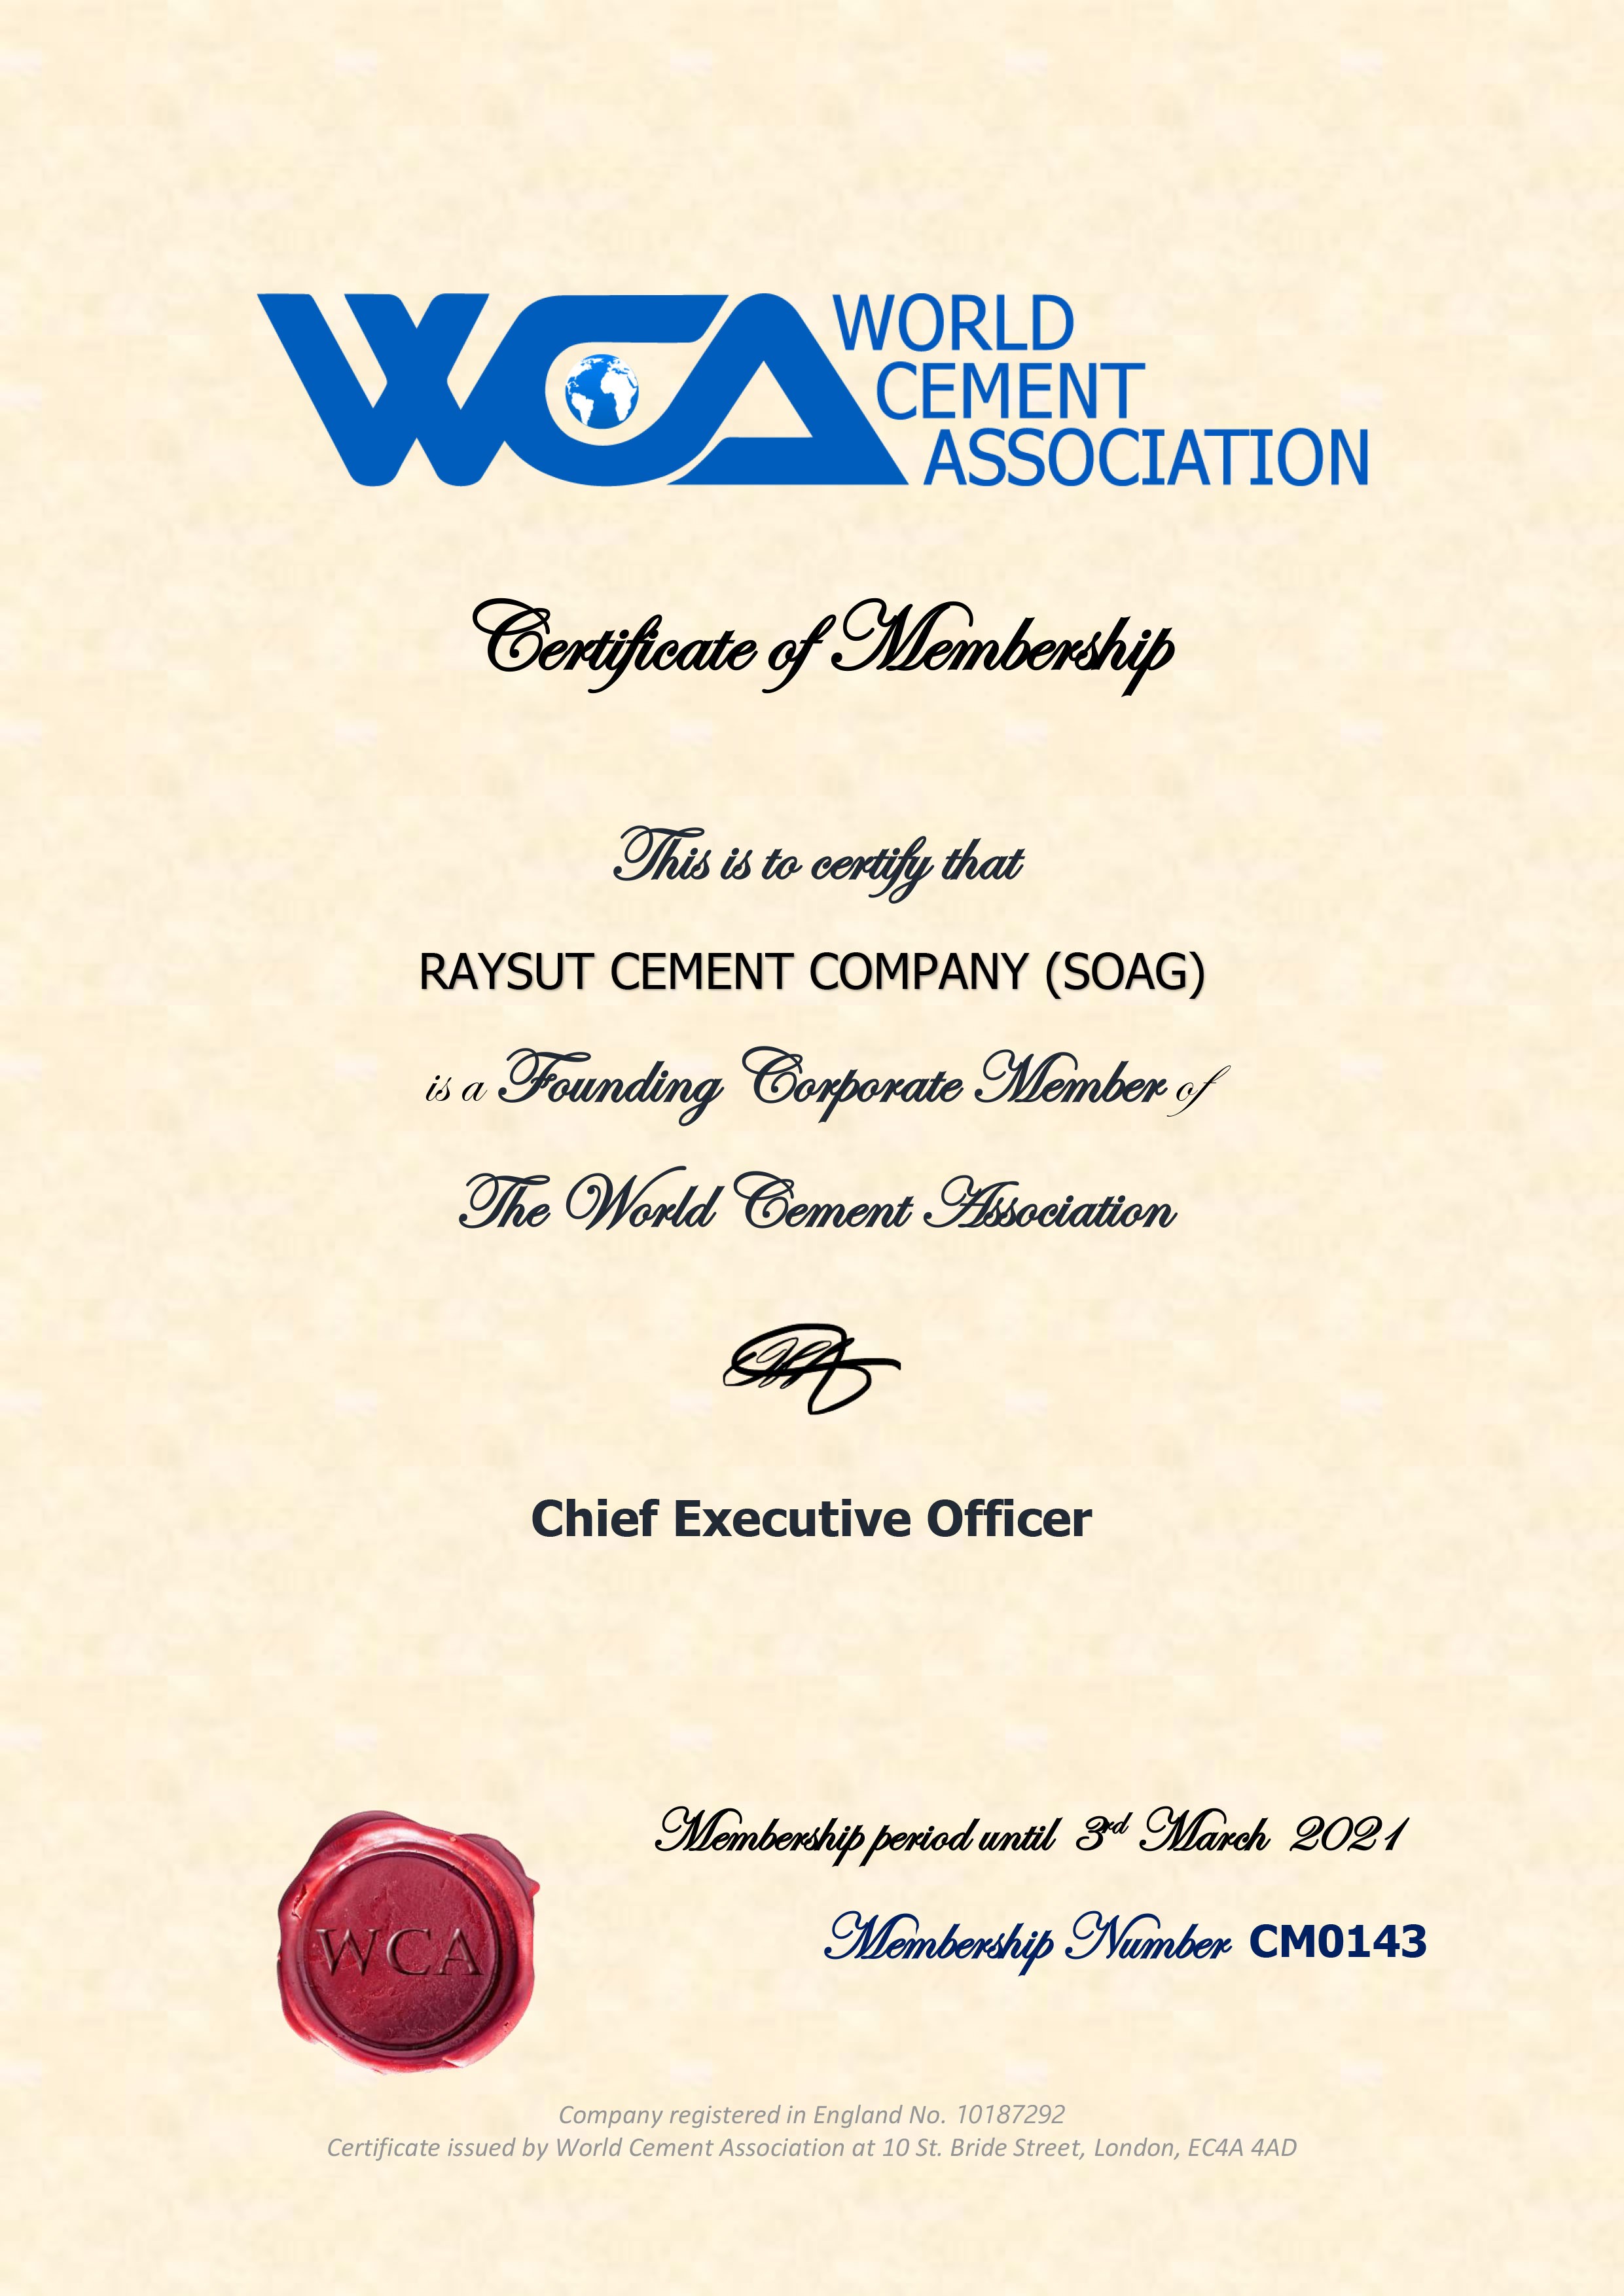 Raysut Cement Company Joins World Cement Association (WCA) as a Corporate Member